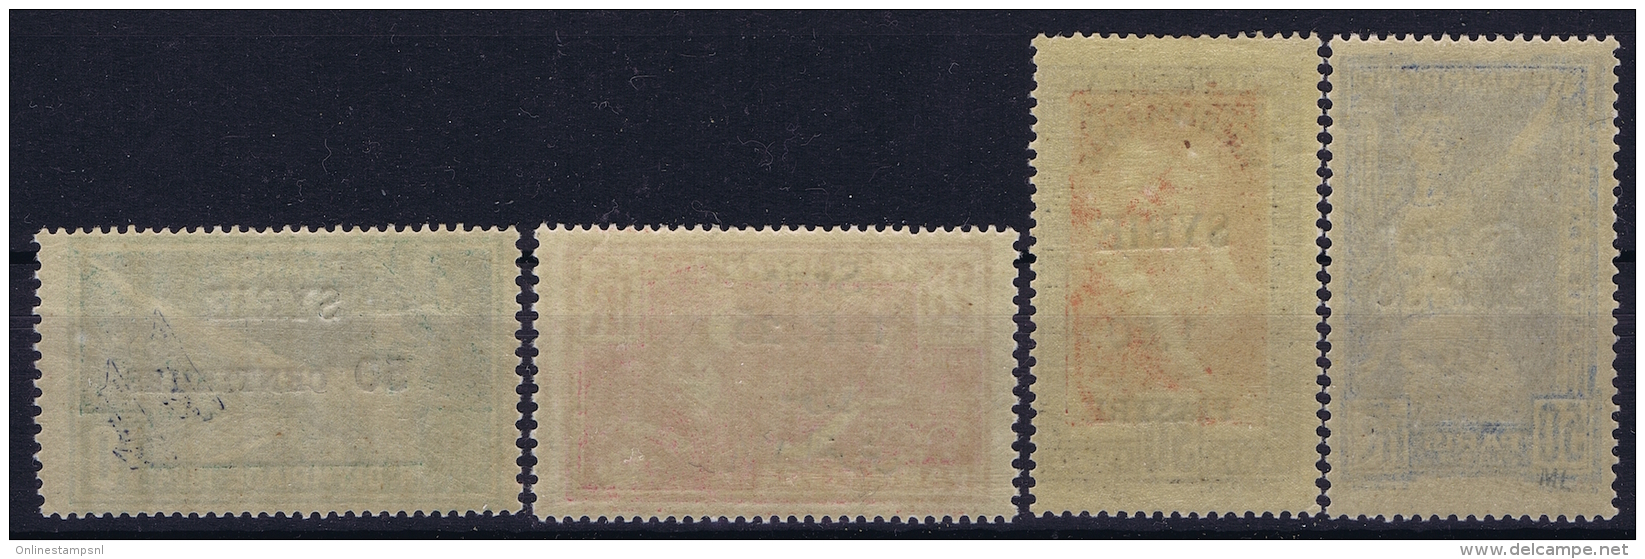 Syrie: Jeux Olympiques - Yv 149 - 152  1924  Neuf Sans Charniere /MNH/**/postfrisch - Unused Stamps